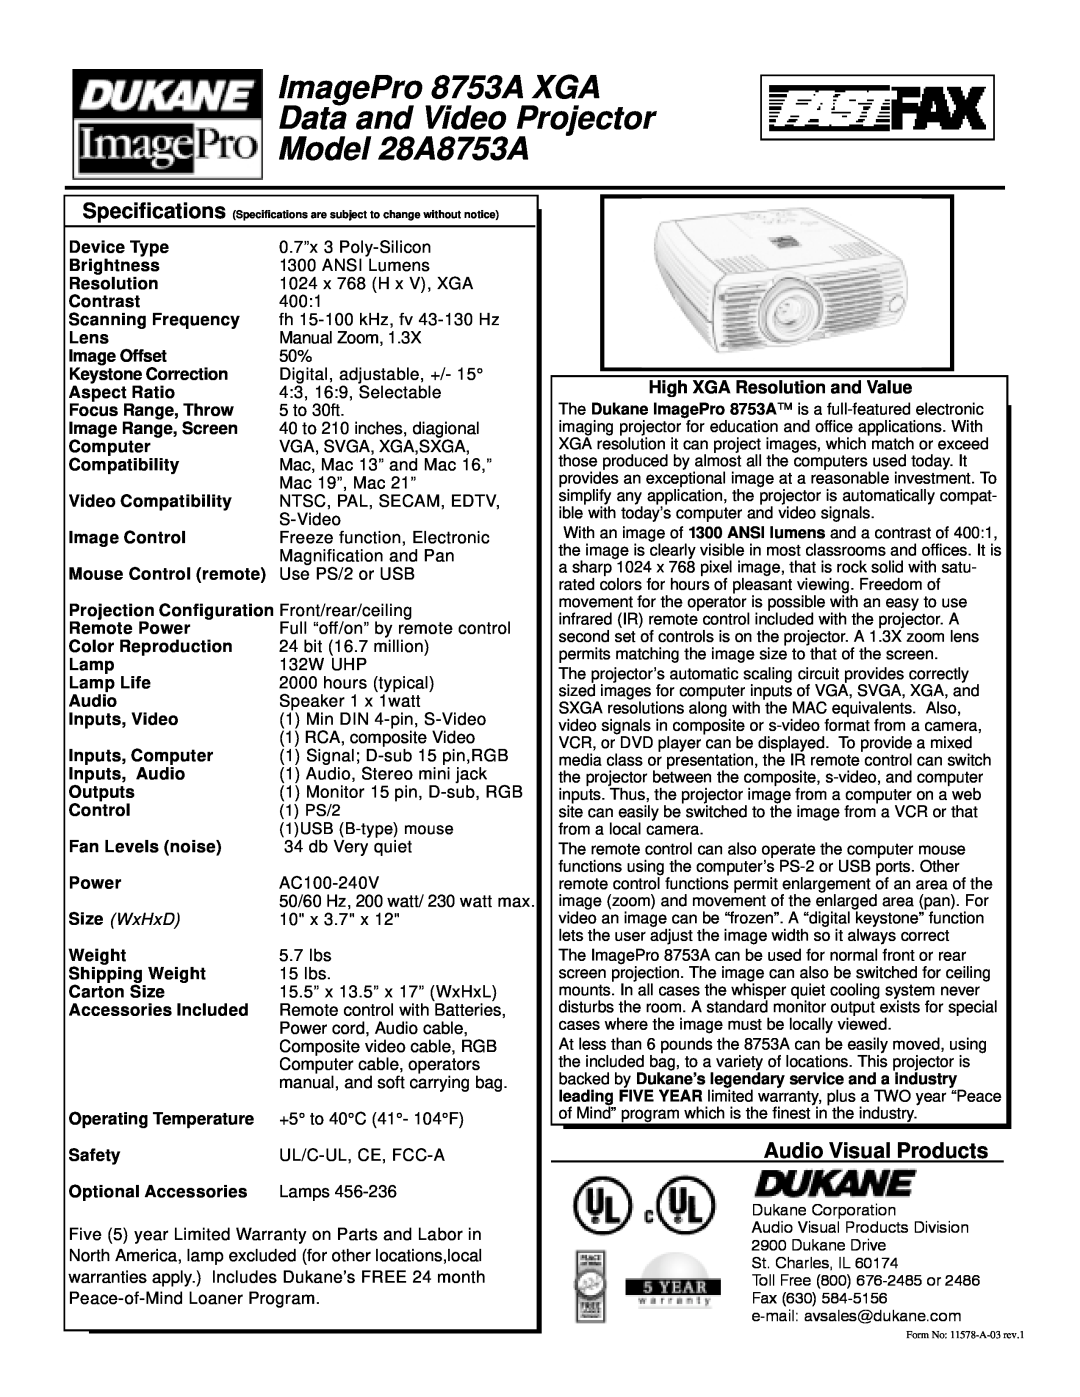 Dukane specifications ImagePro 8753A XGA Data and Video Projector Model 28A8753A, Audio Visual Products, Size WxHxD 